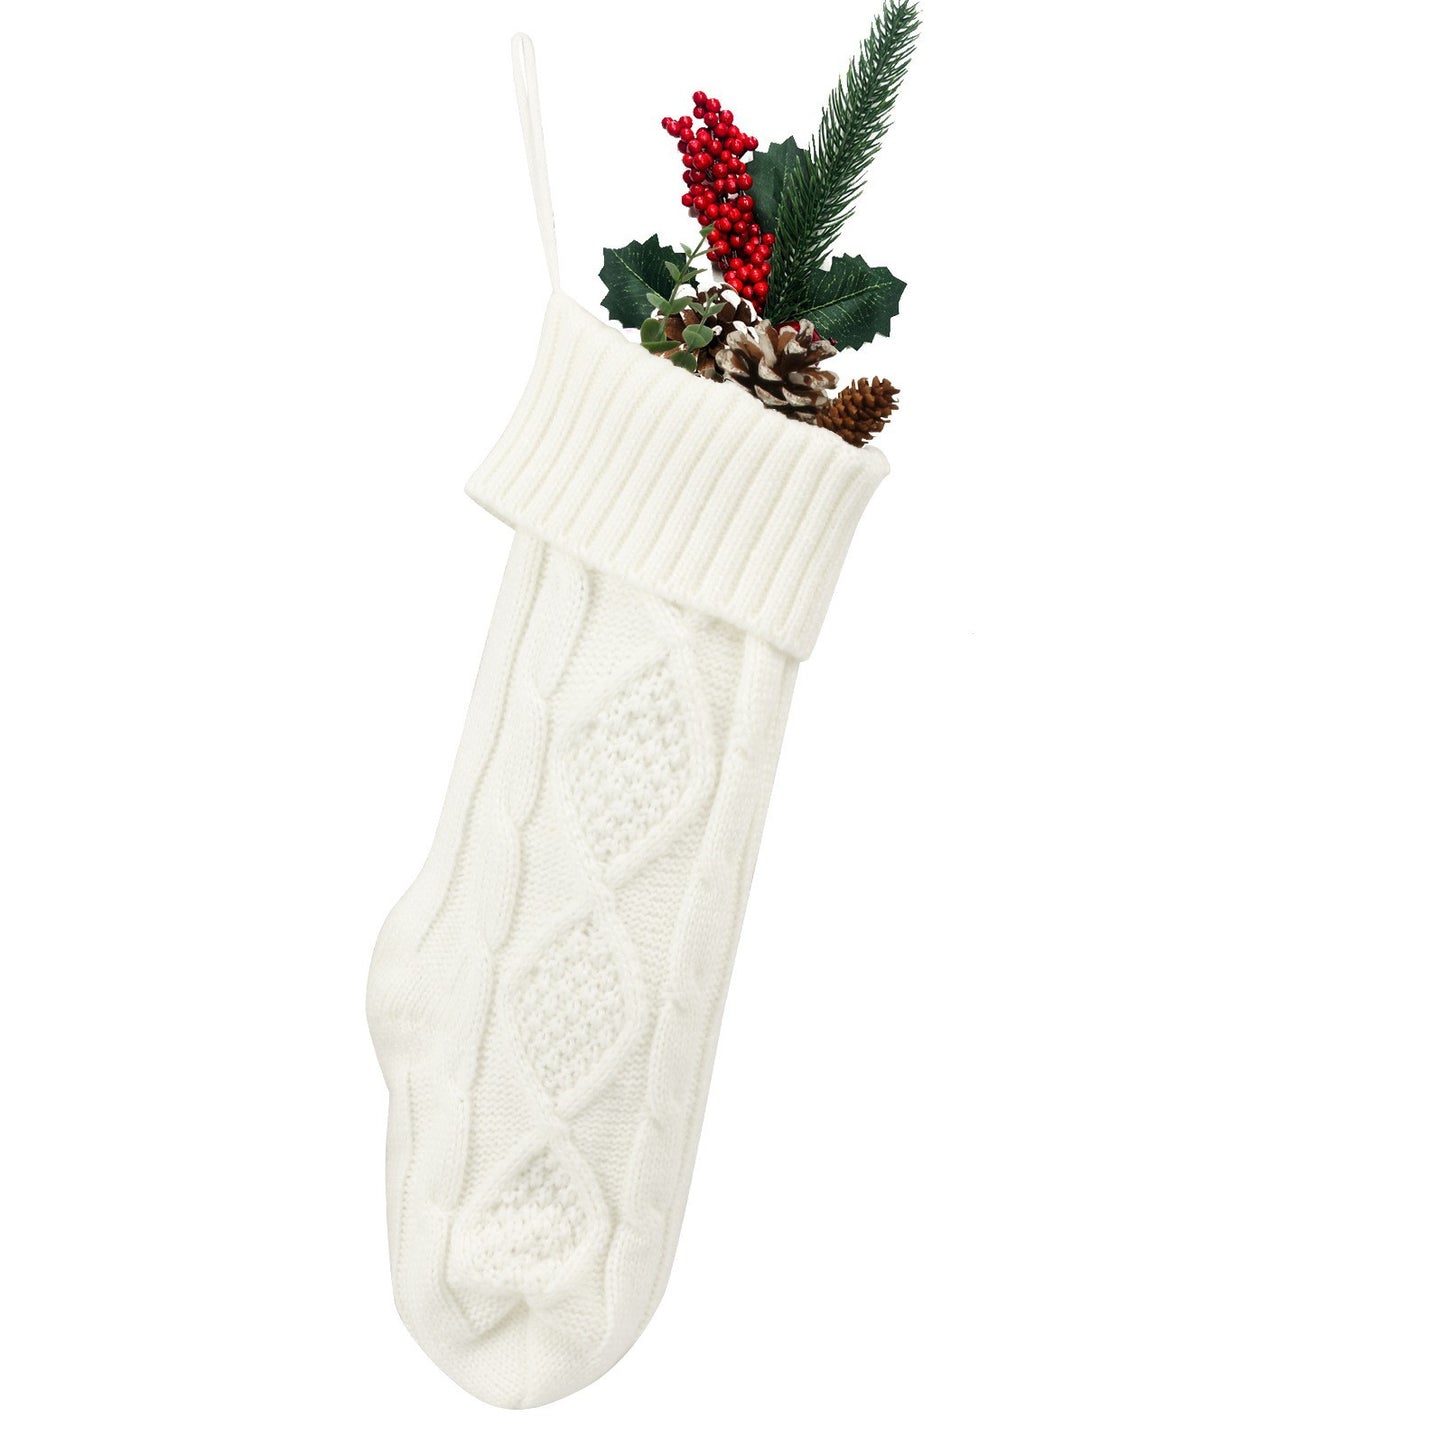 Embroidered Knitted Christmas Stockings Gift Bag